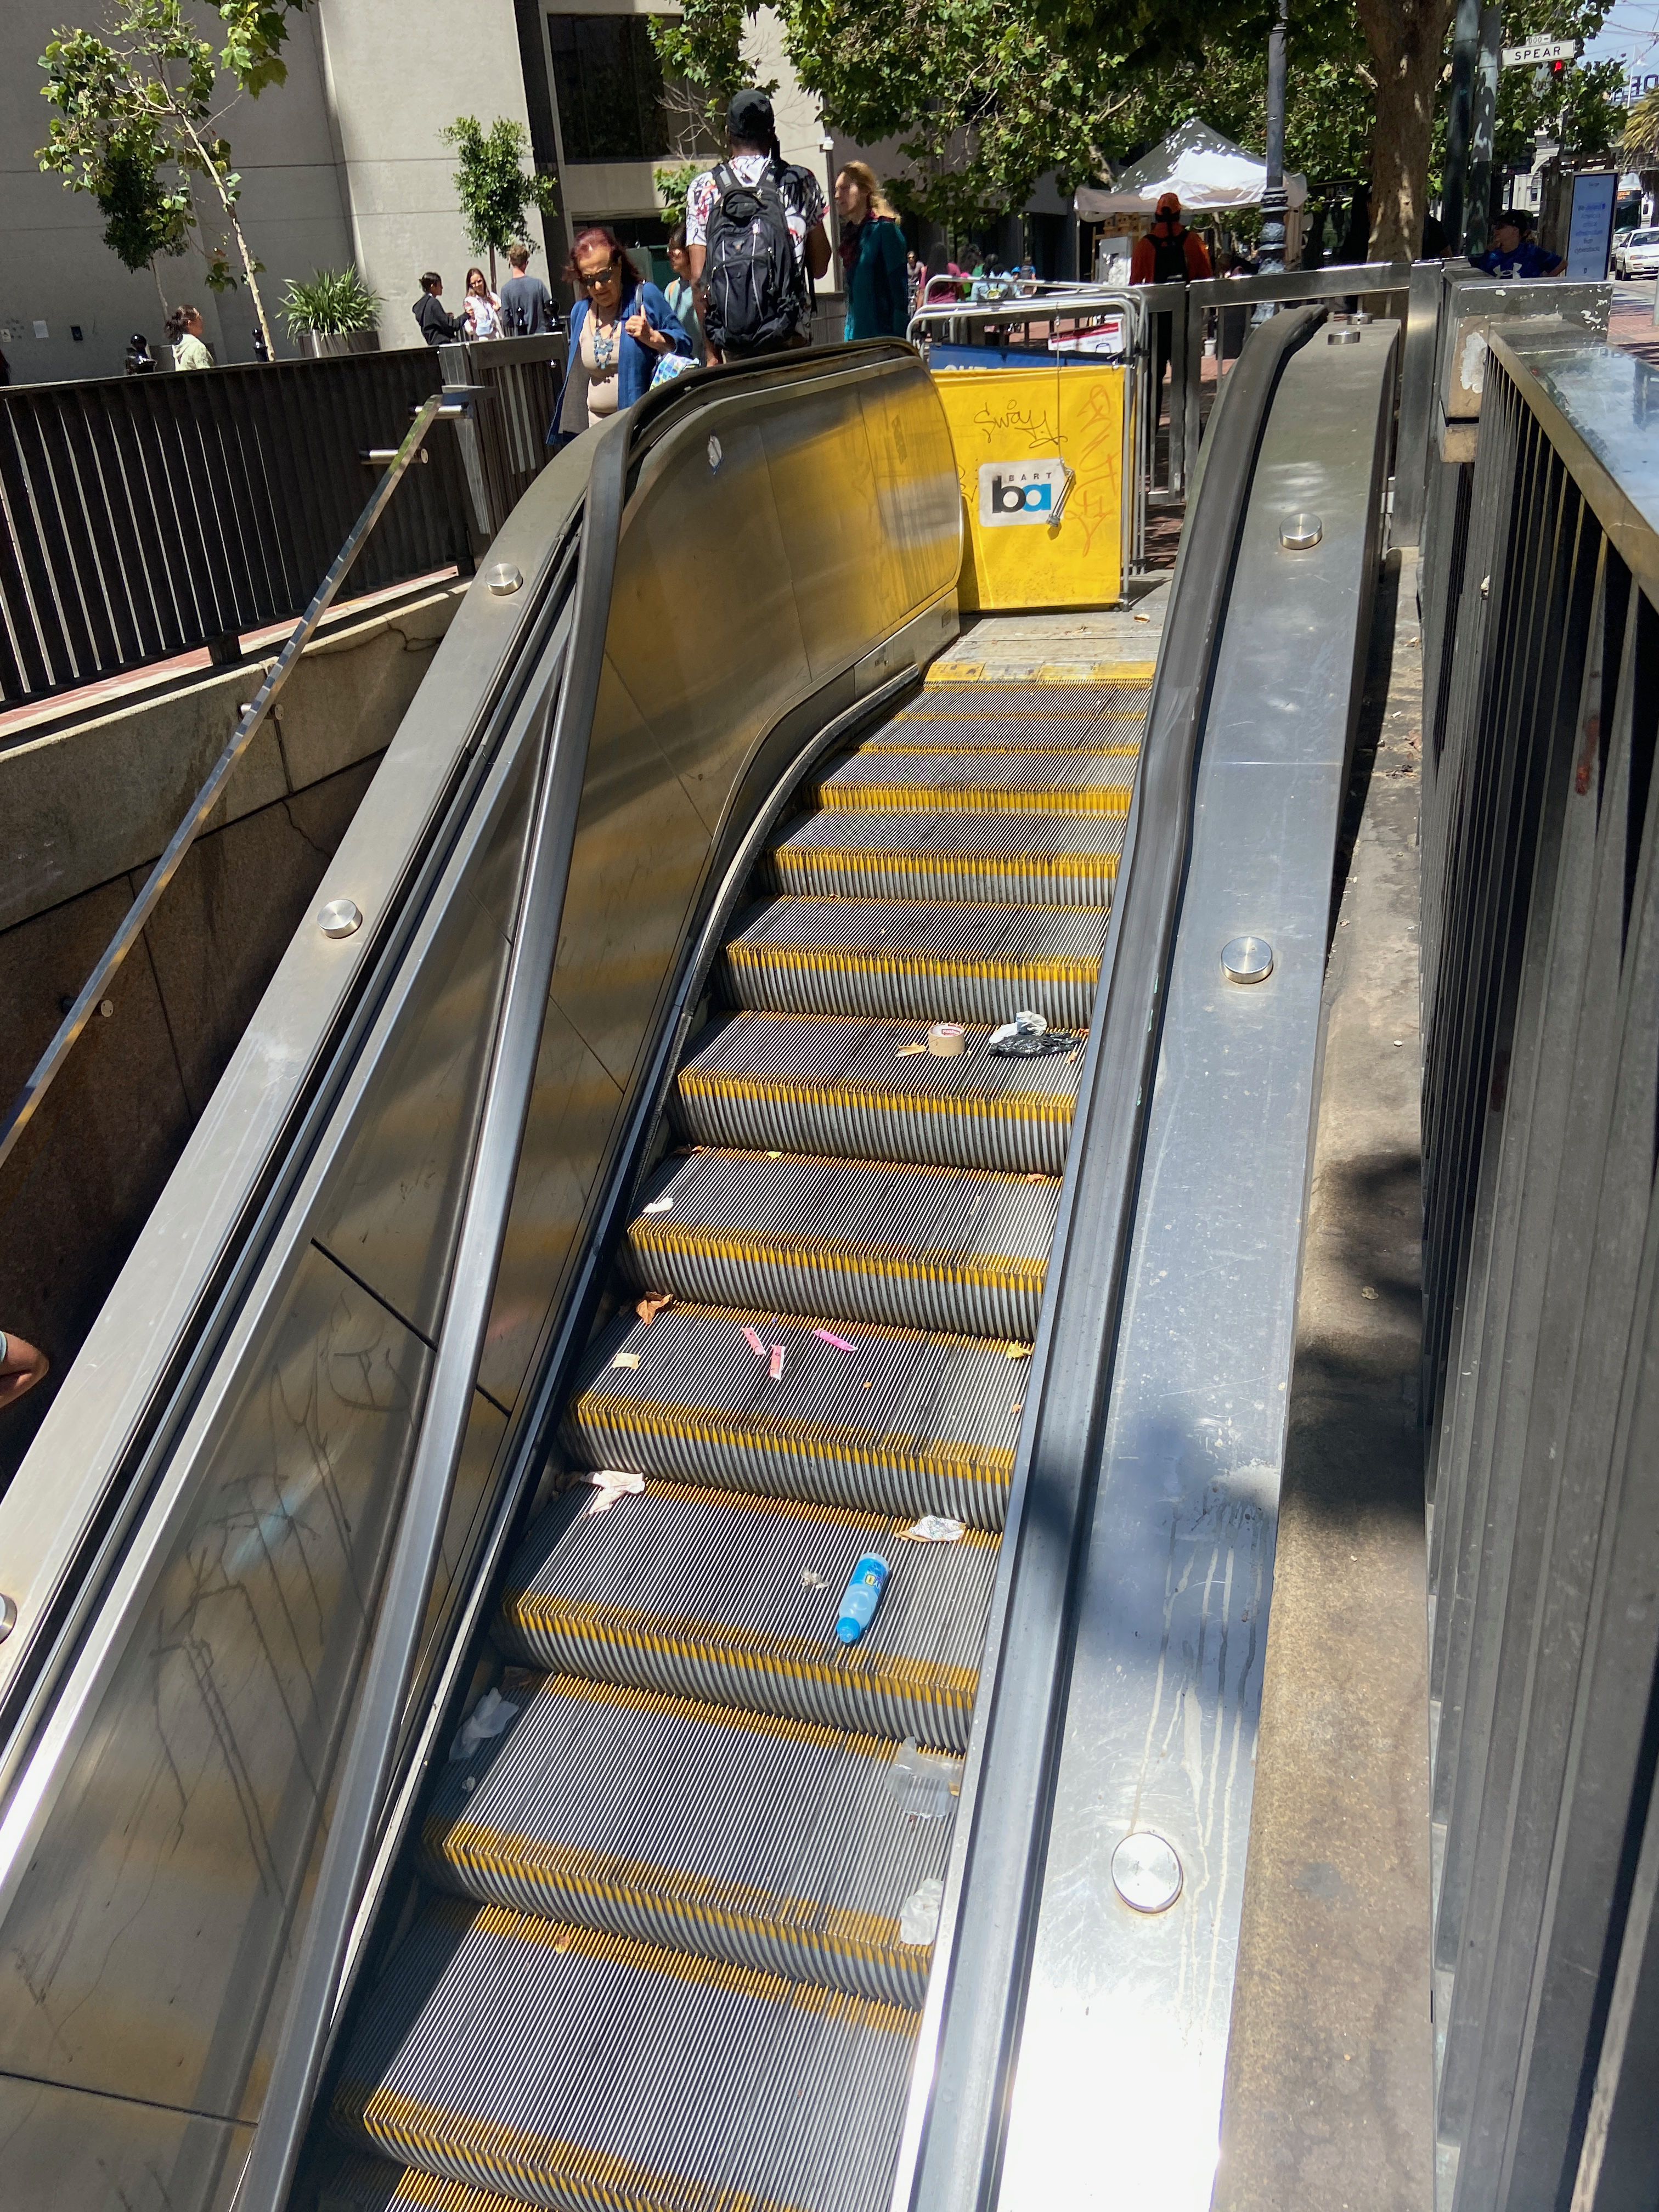 An out of service BART escalator, collecting trash